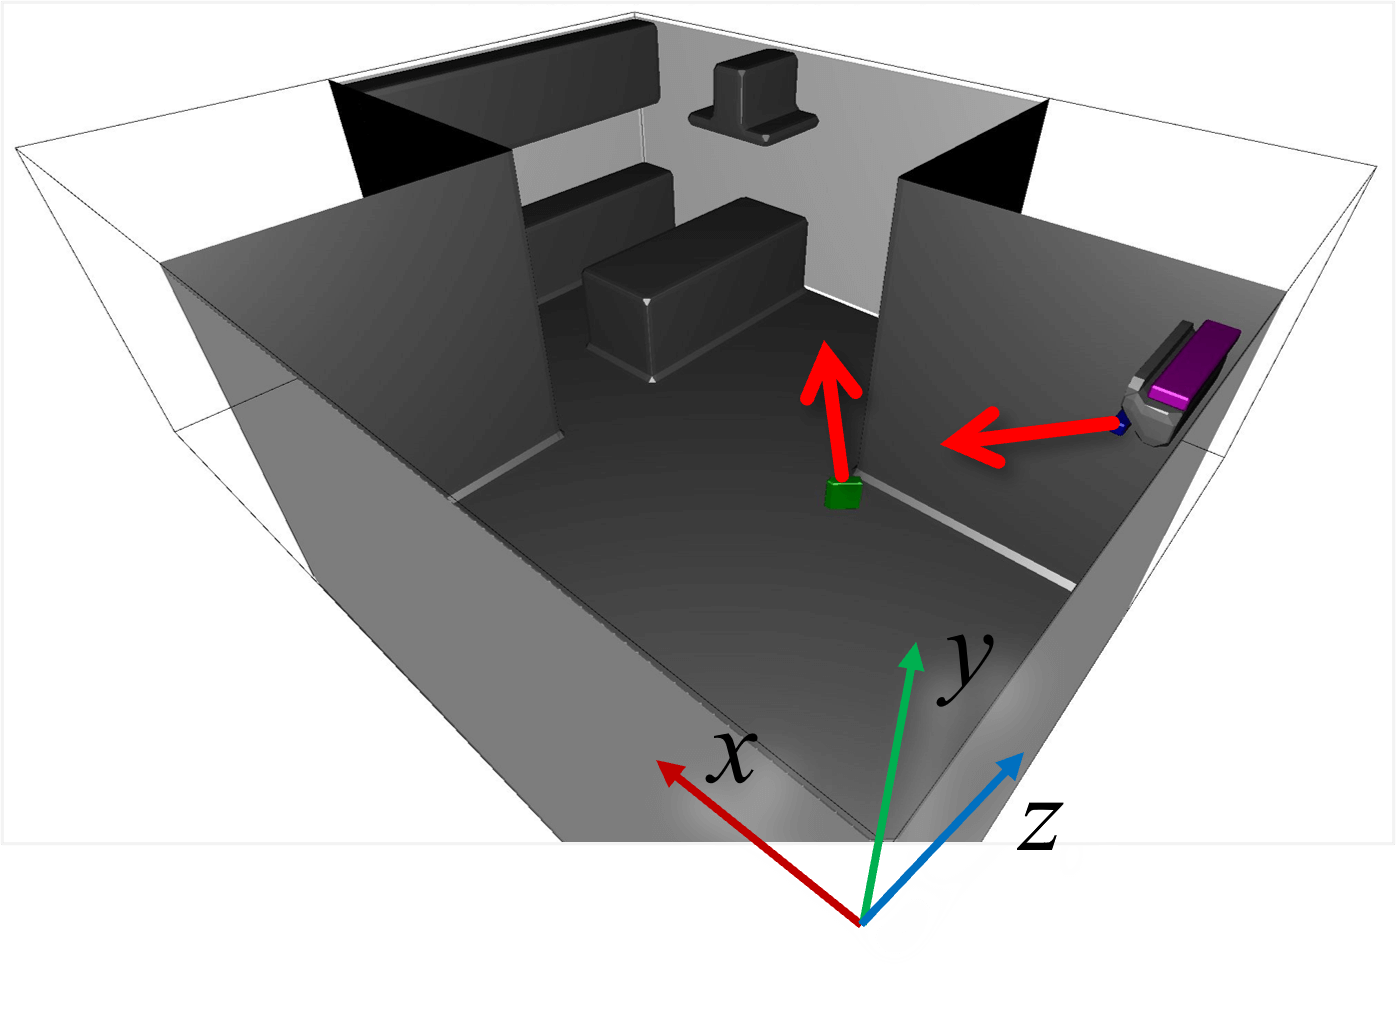 Constructed boundary condition (ceiling is not displayed for visibility). Red arrows indicate the flow directions from the AC and the circulation fan.